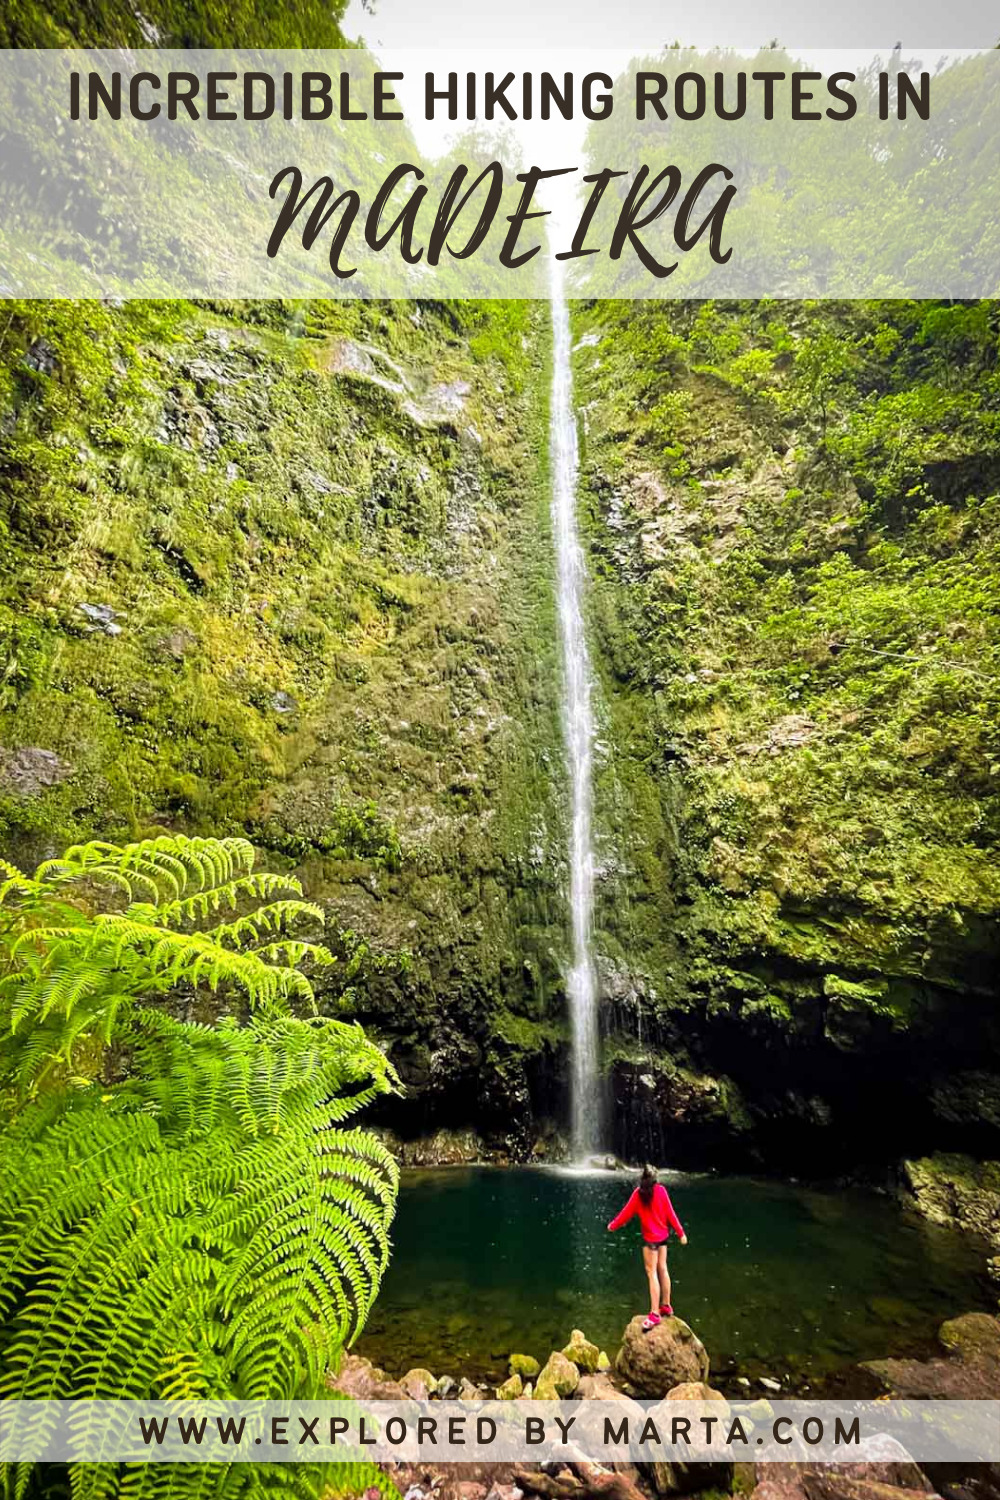 Incredible hiking routes in Madeira